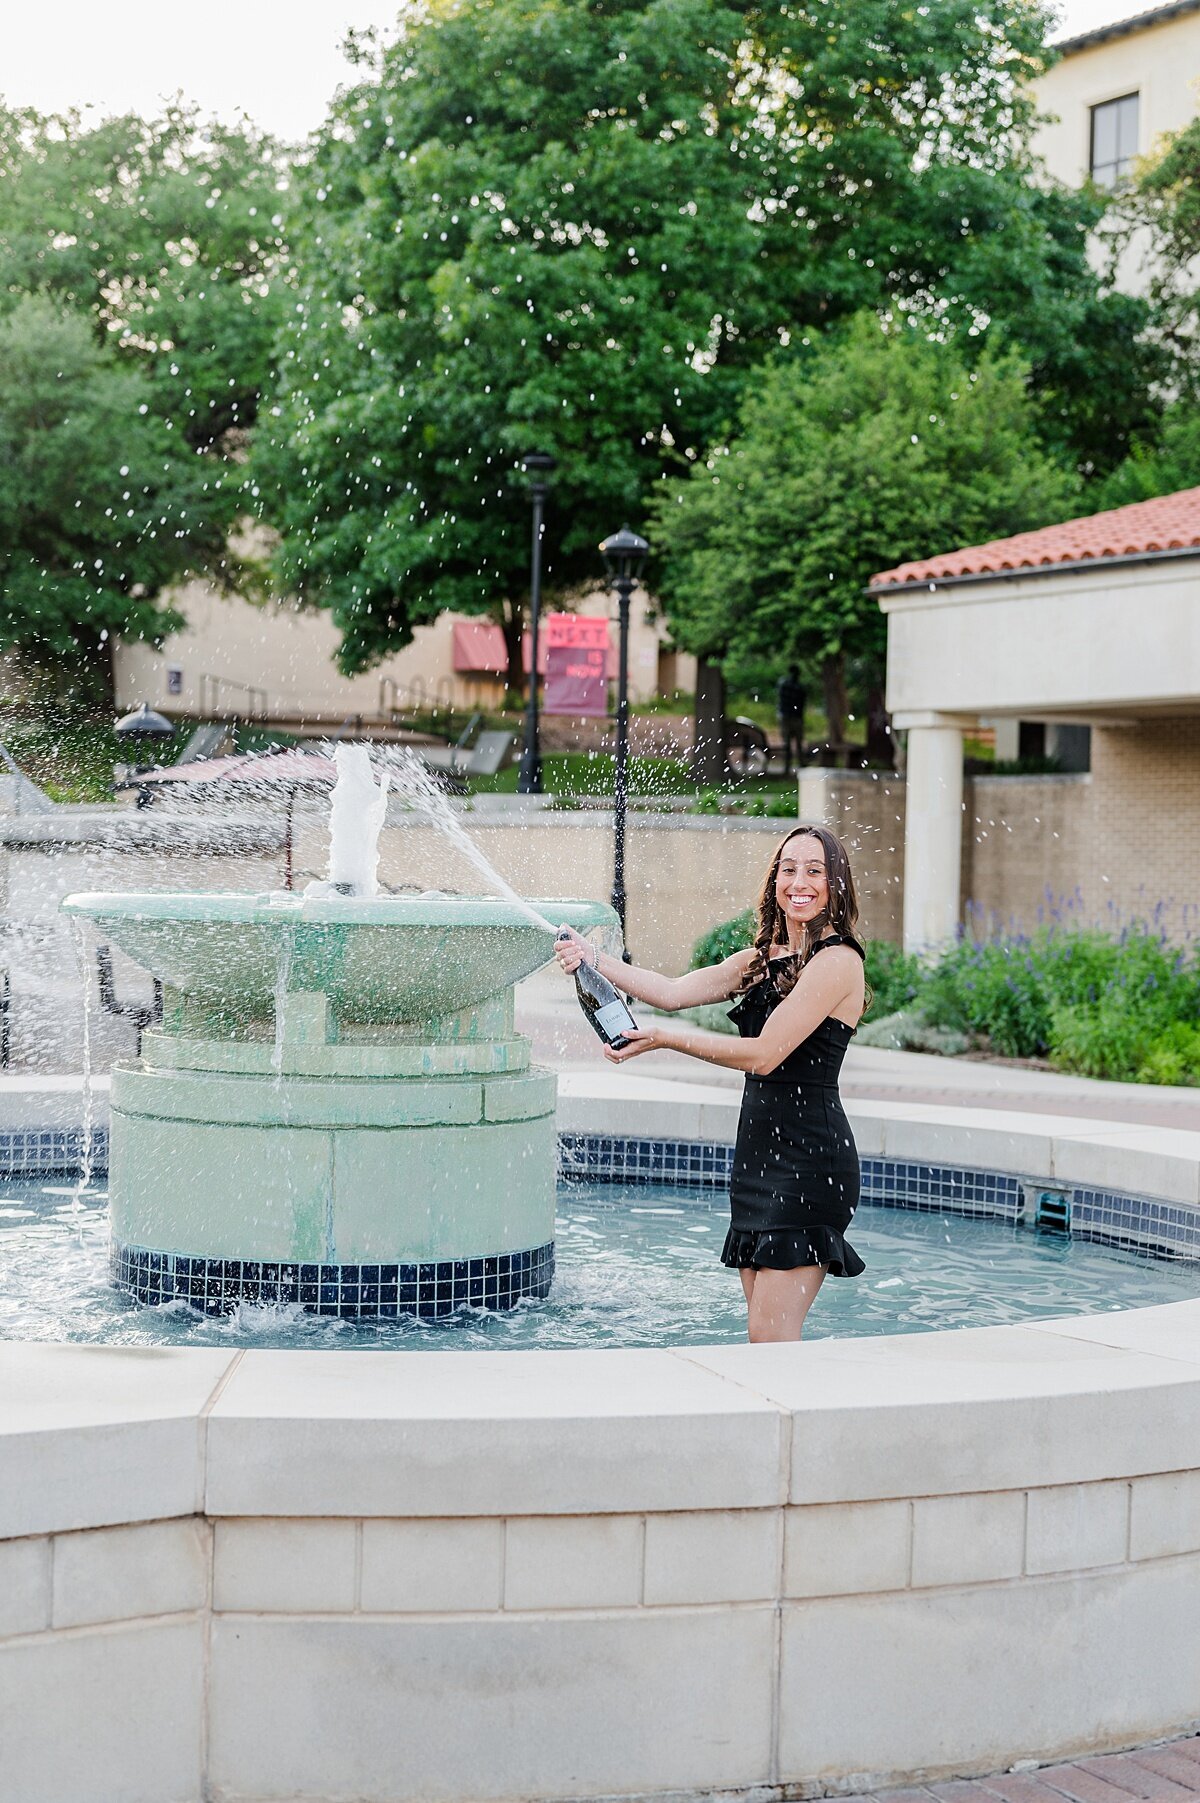 Texas State Graduation Photo by the Fountain